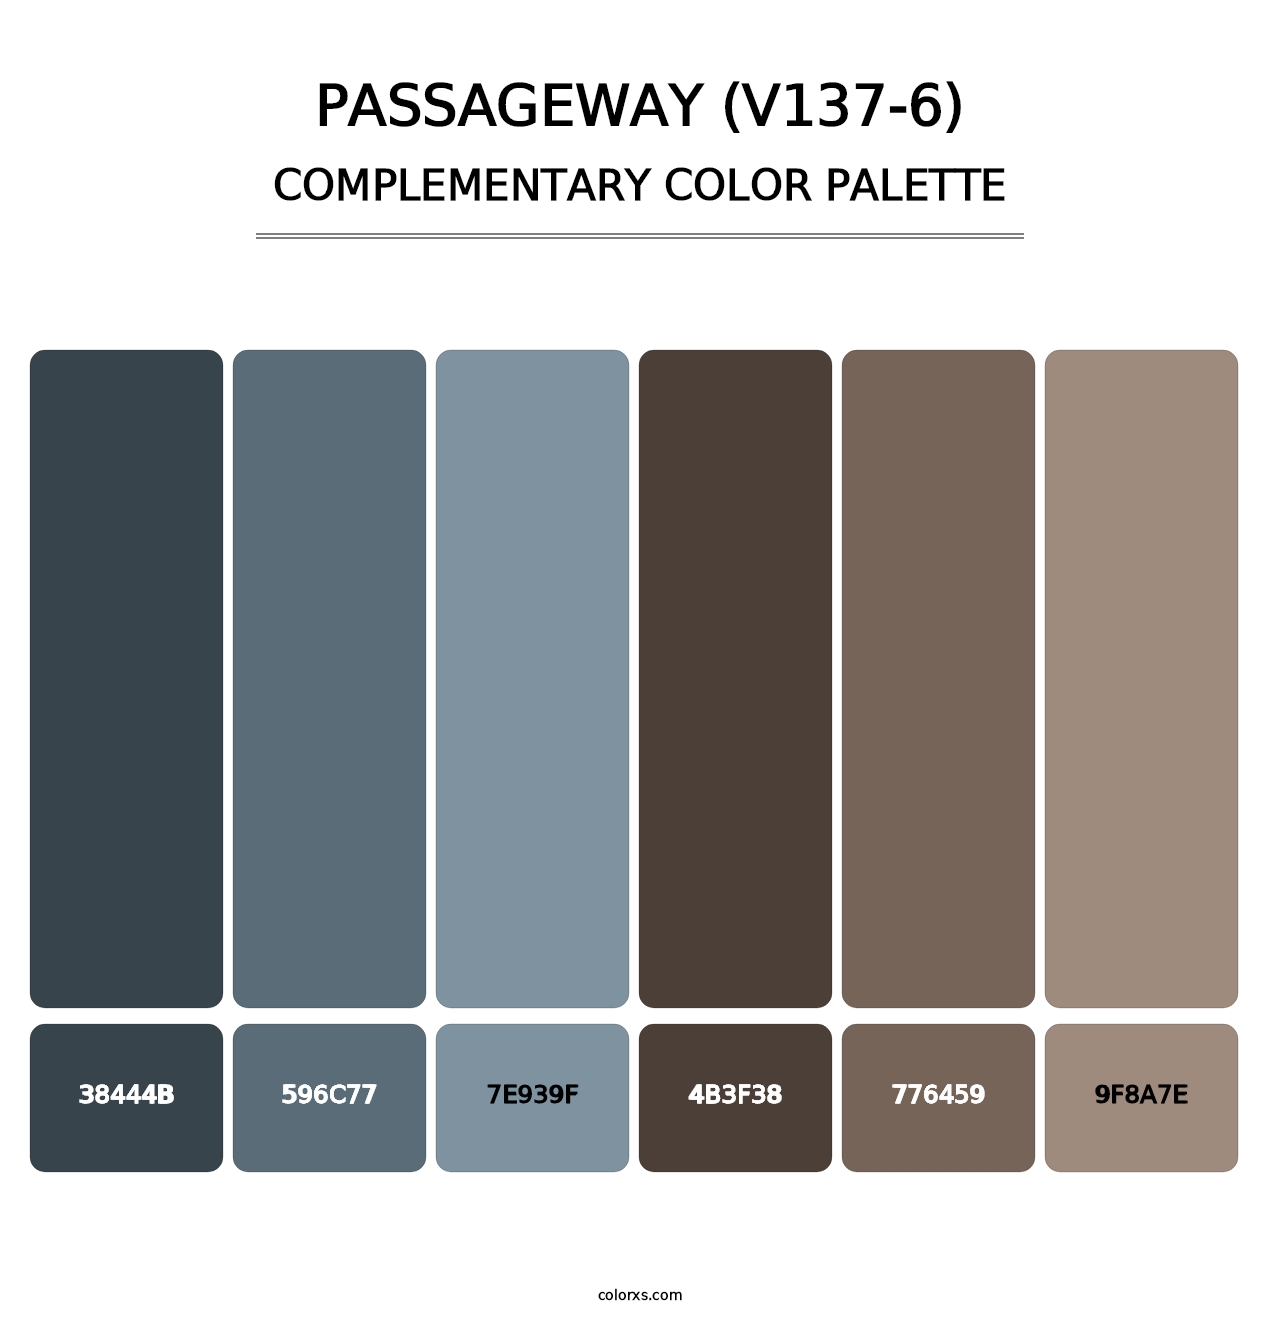 Passageway (V137-6) - Complementary Color Palette